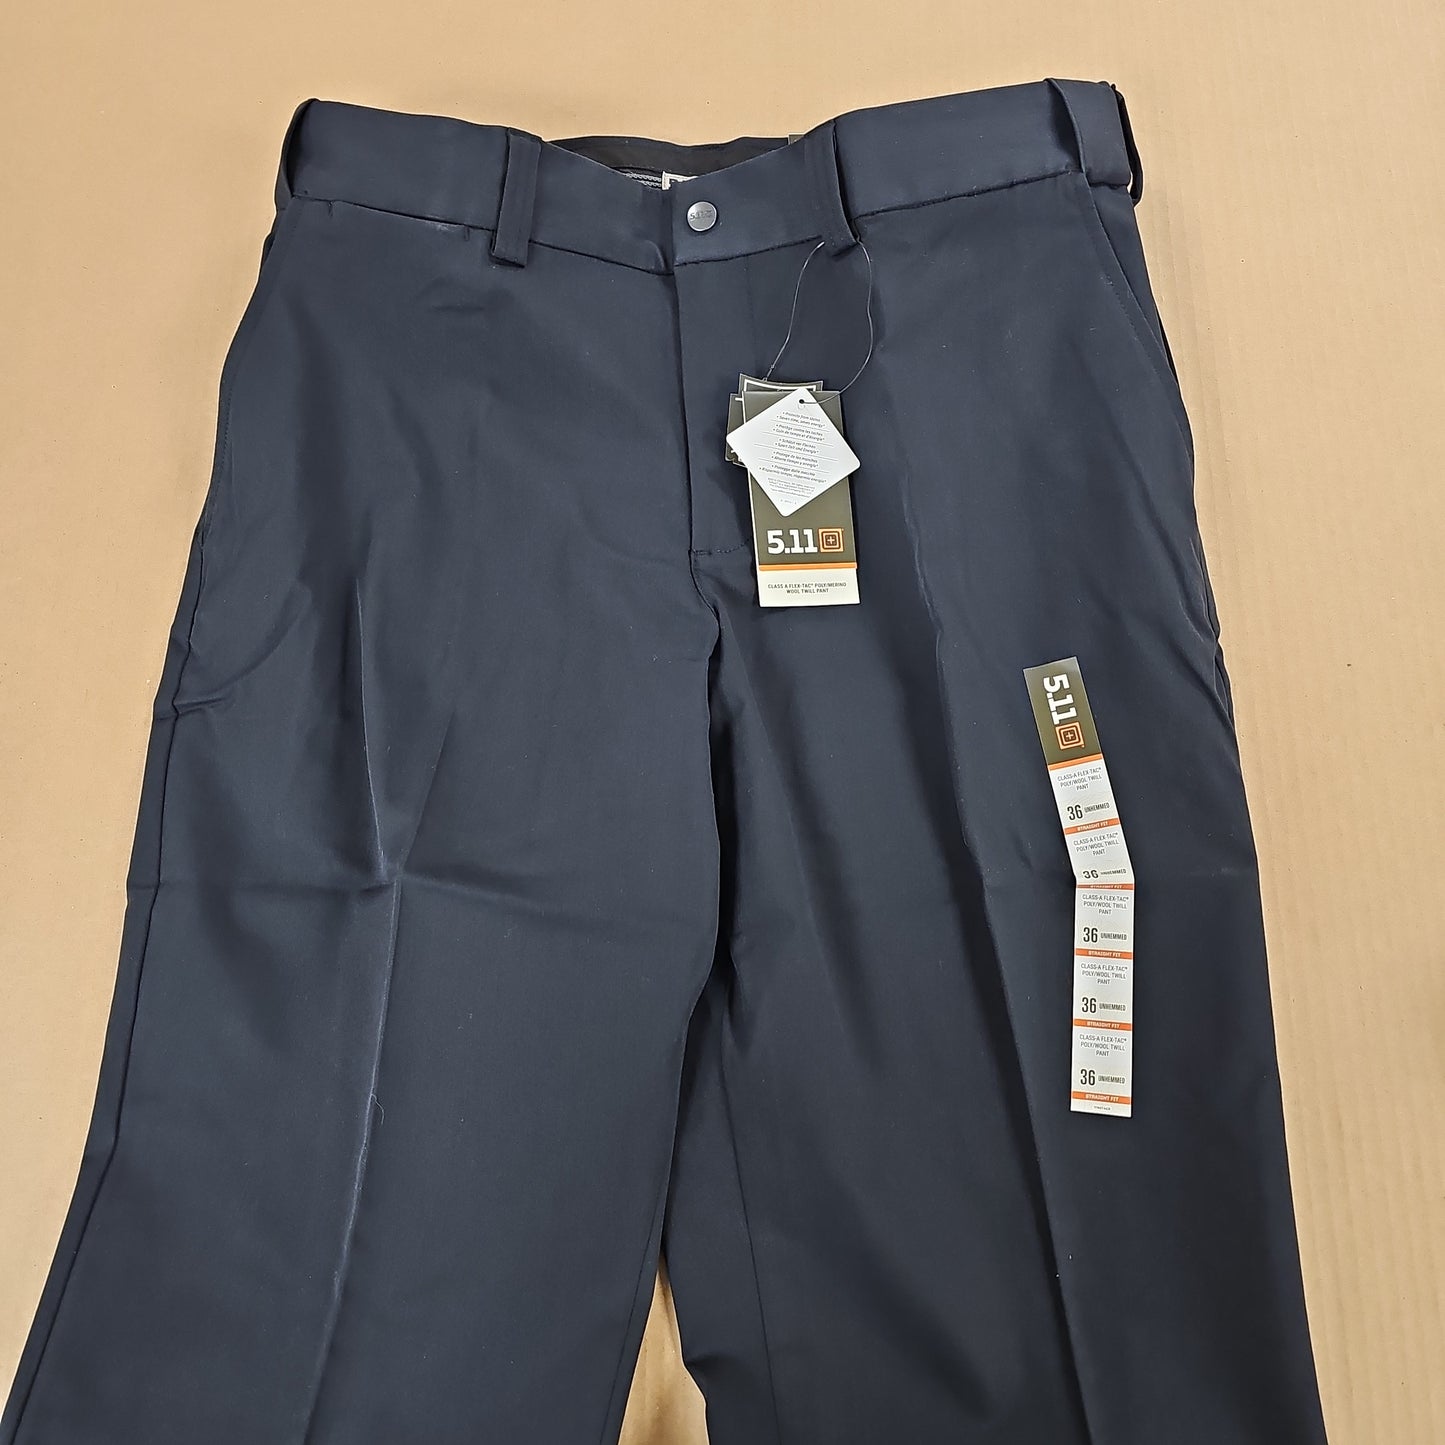 5.11 Tactical Pant: Twill, FT PW, CL-A Mid. Navy, 36 74492-750-36